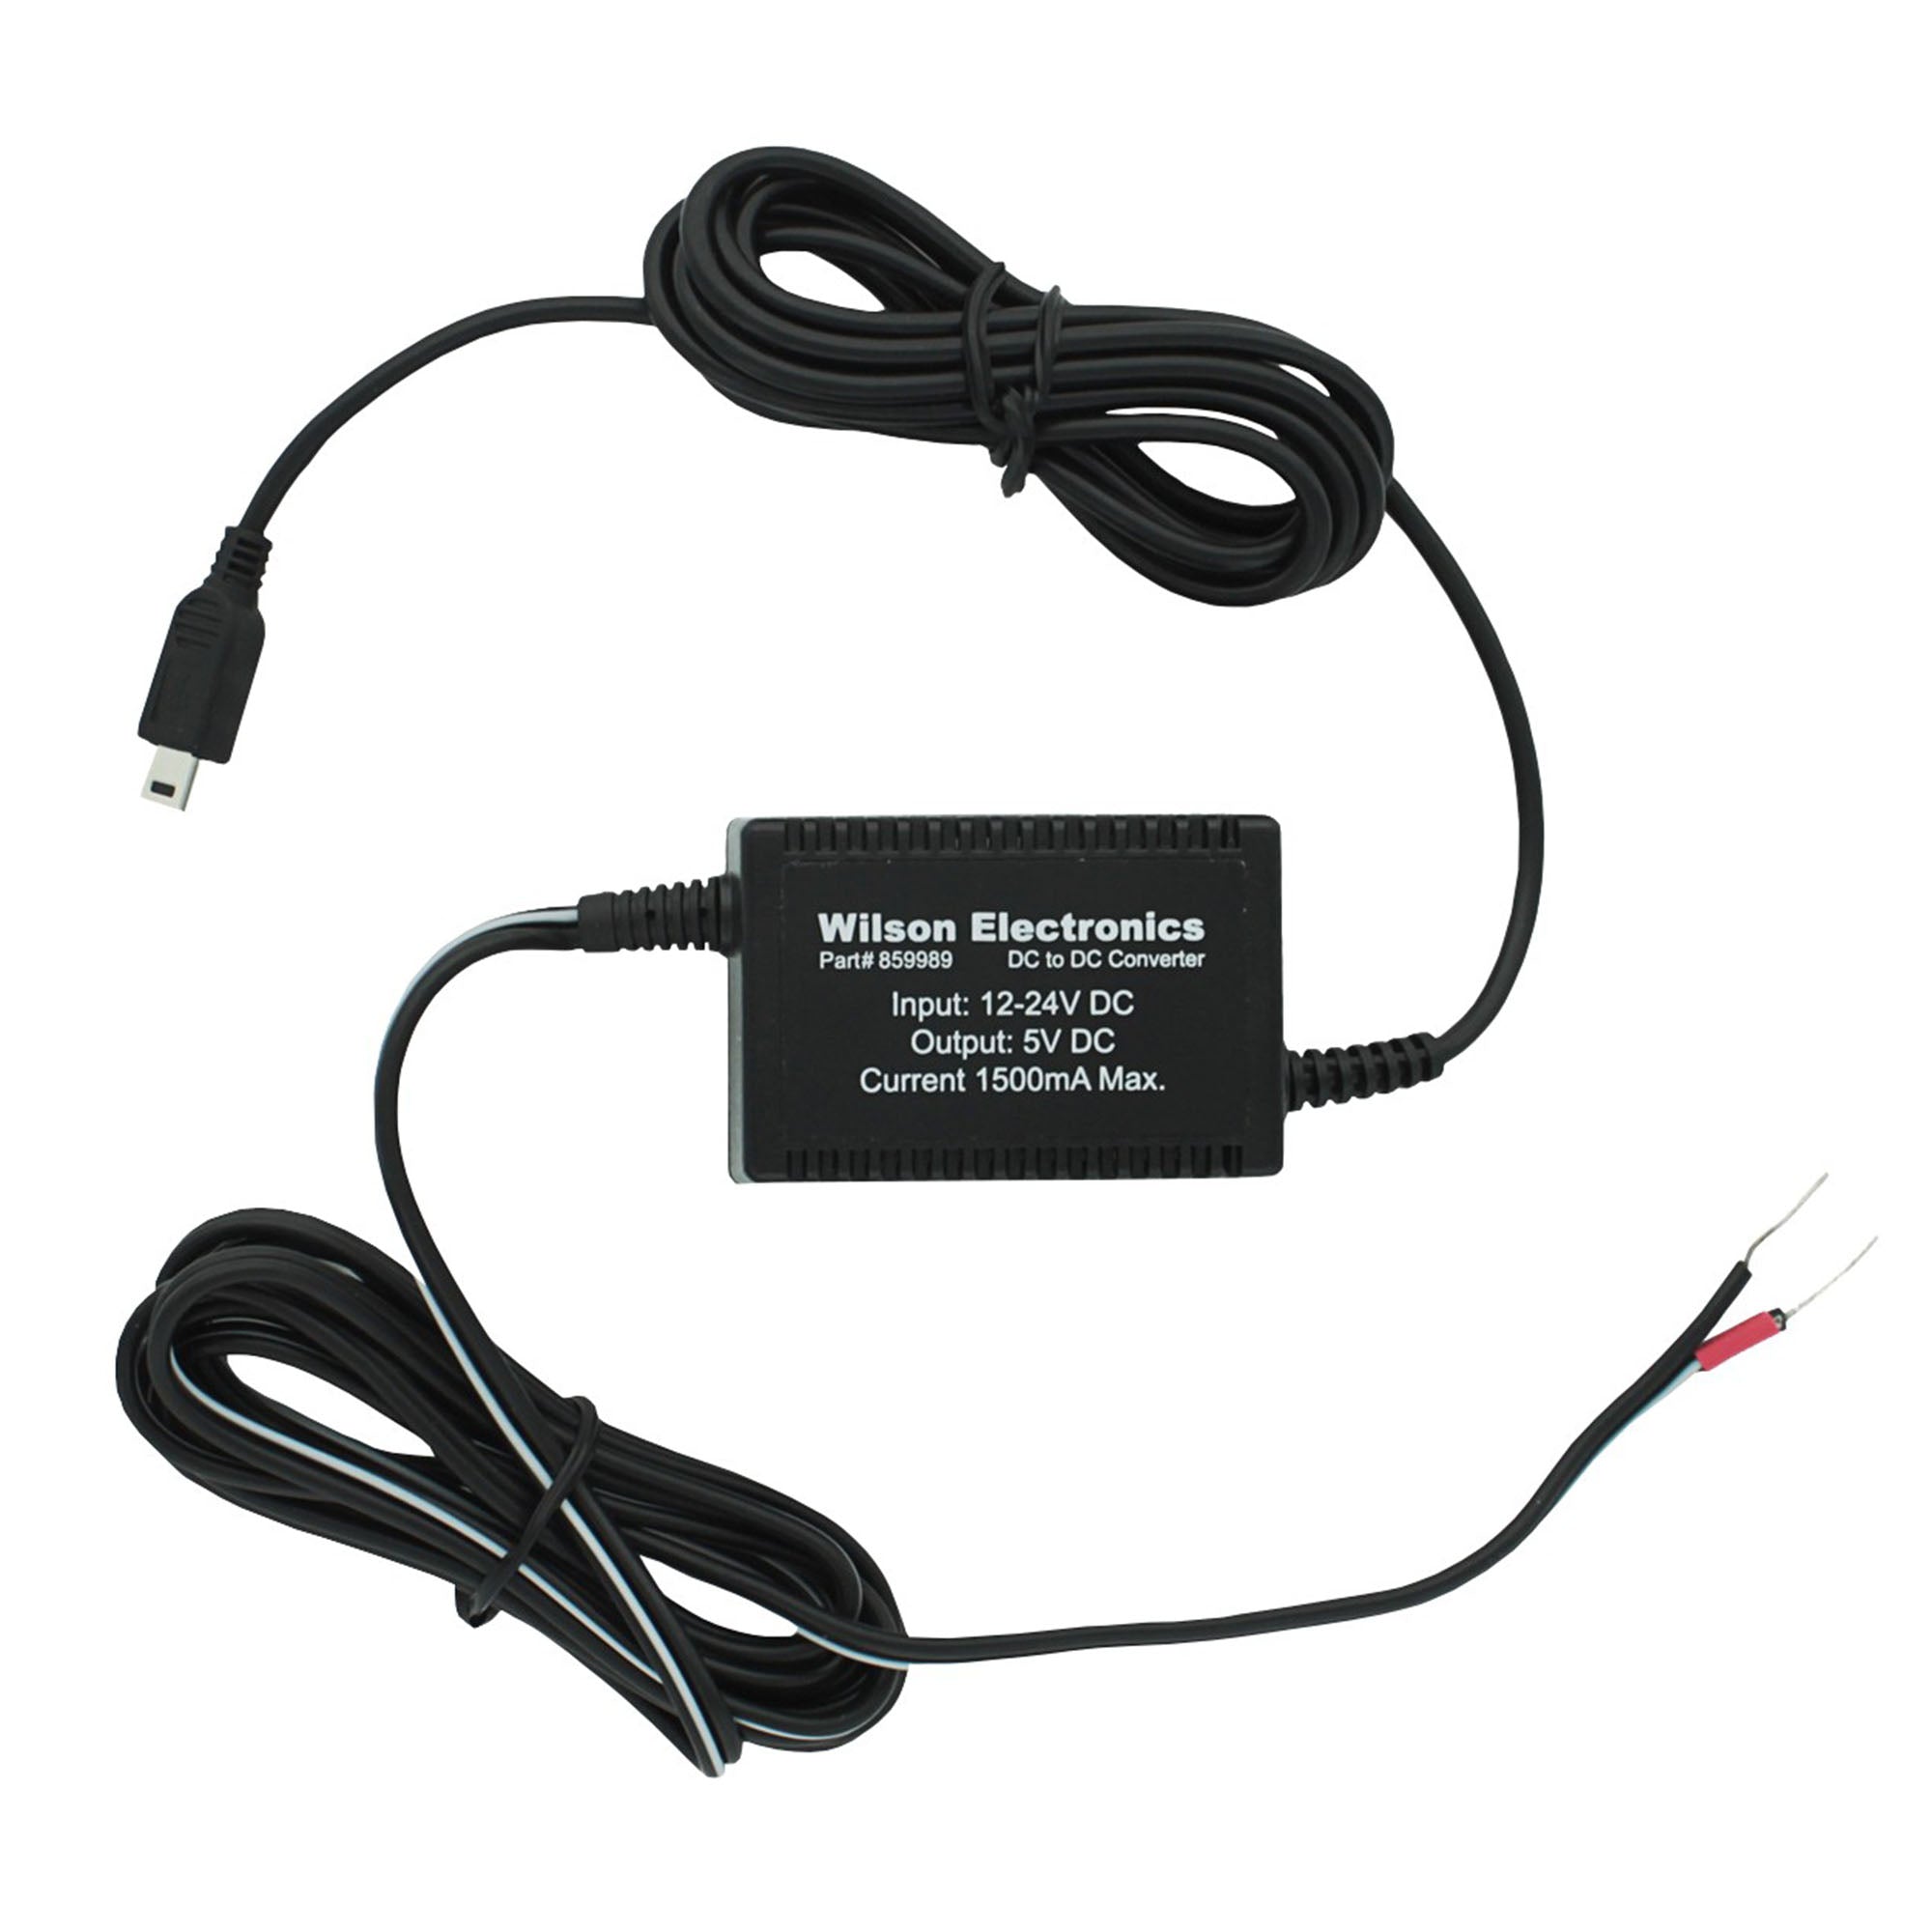 Wilson DC hardwire power supply 5v/1.5A (Compatible with 470113F, 812726F, 811225, 460309, 460209) - 690WI859989